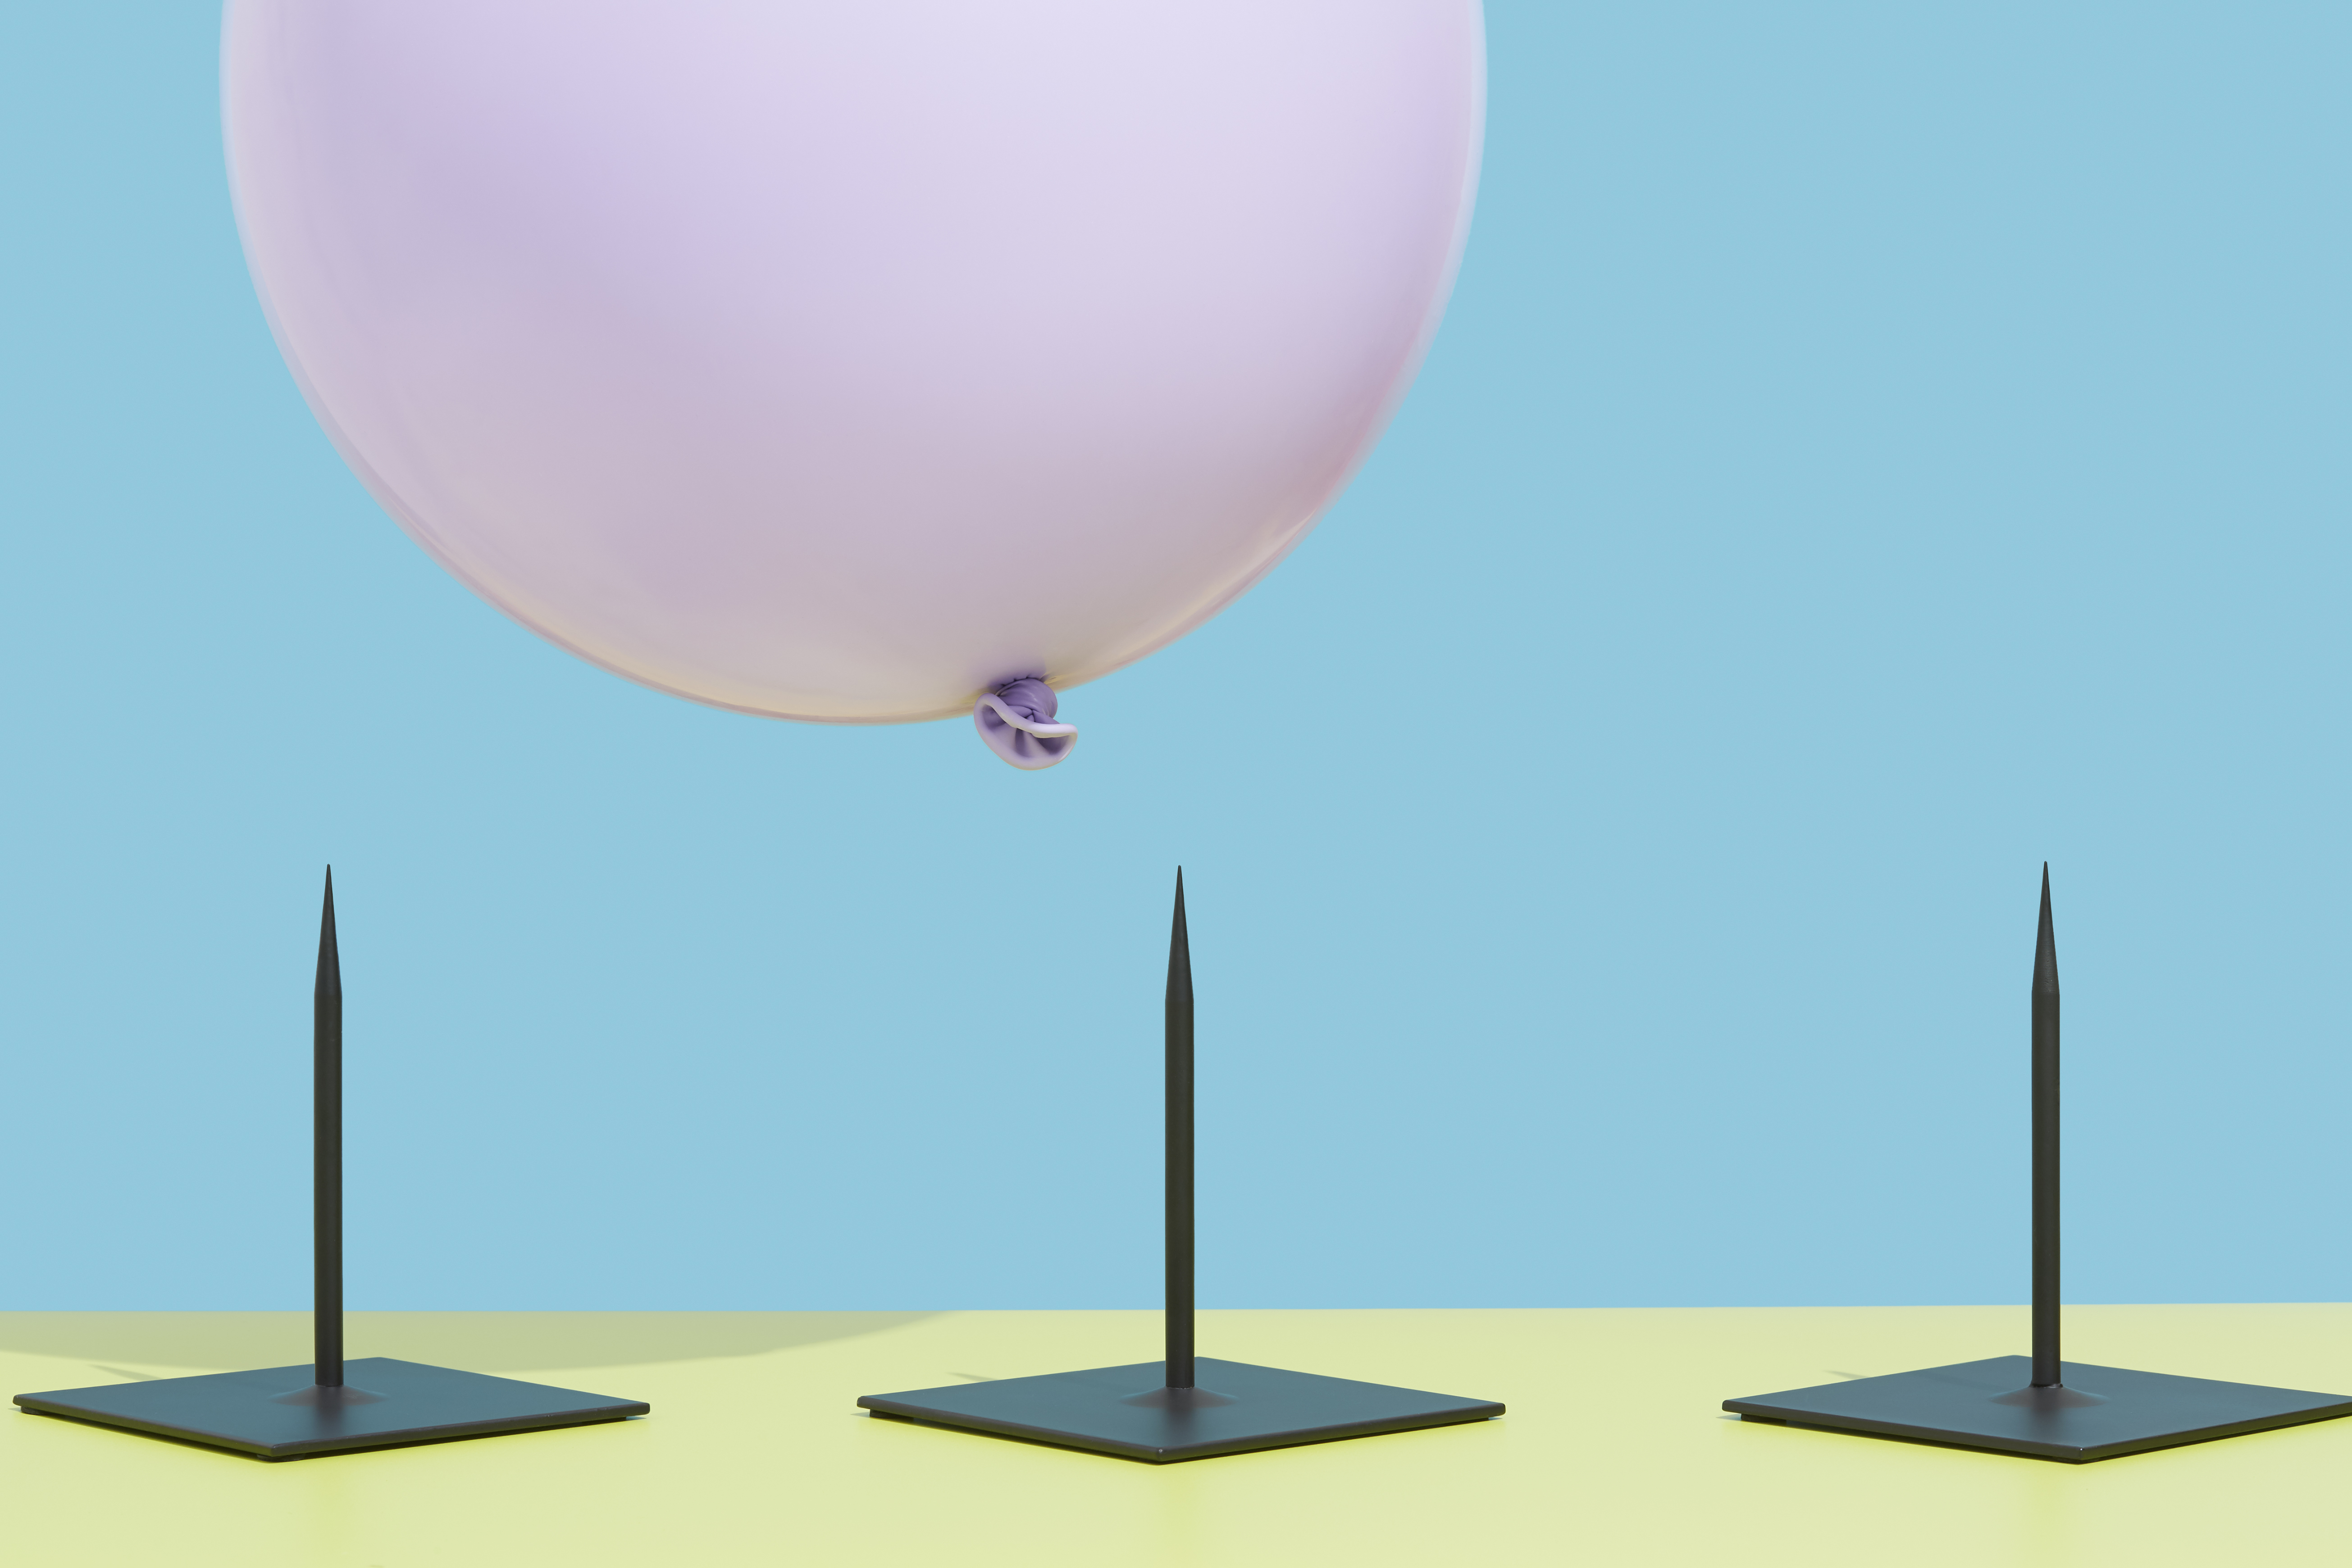 Image of a pink balloon floating over three spikes to represent risk.